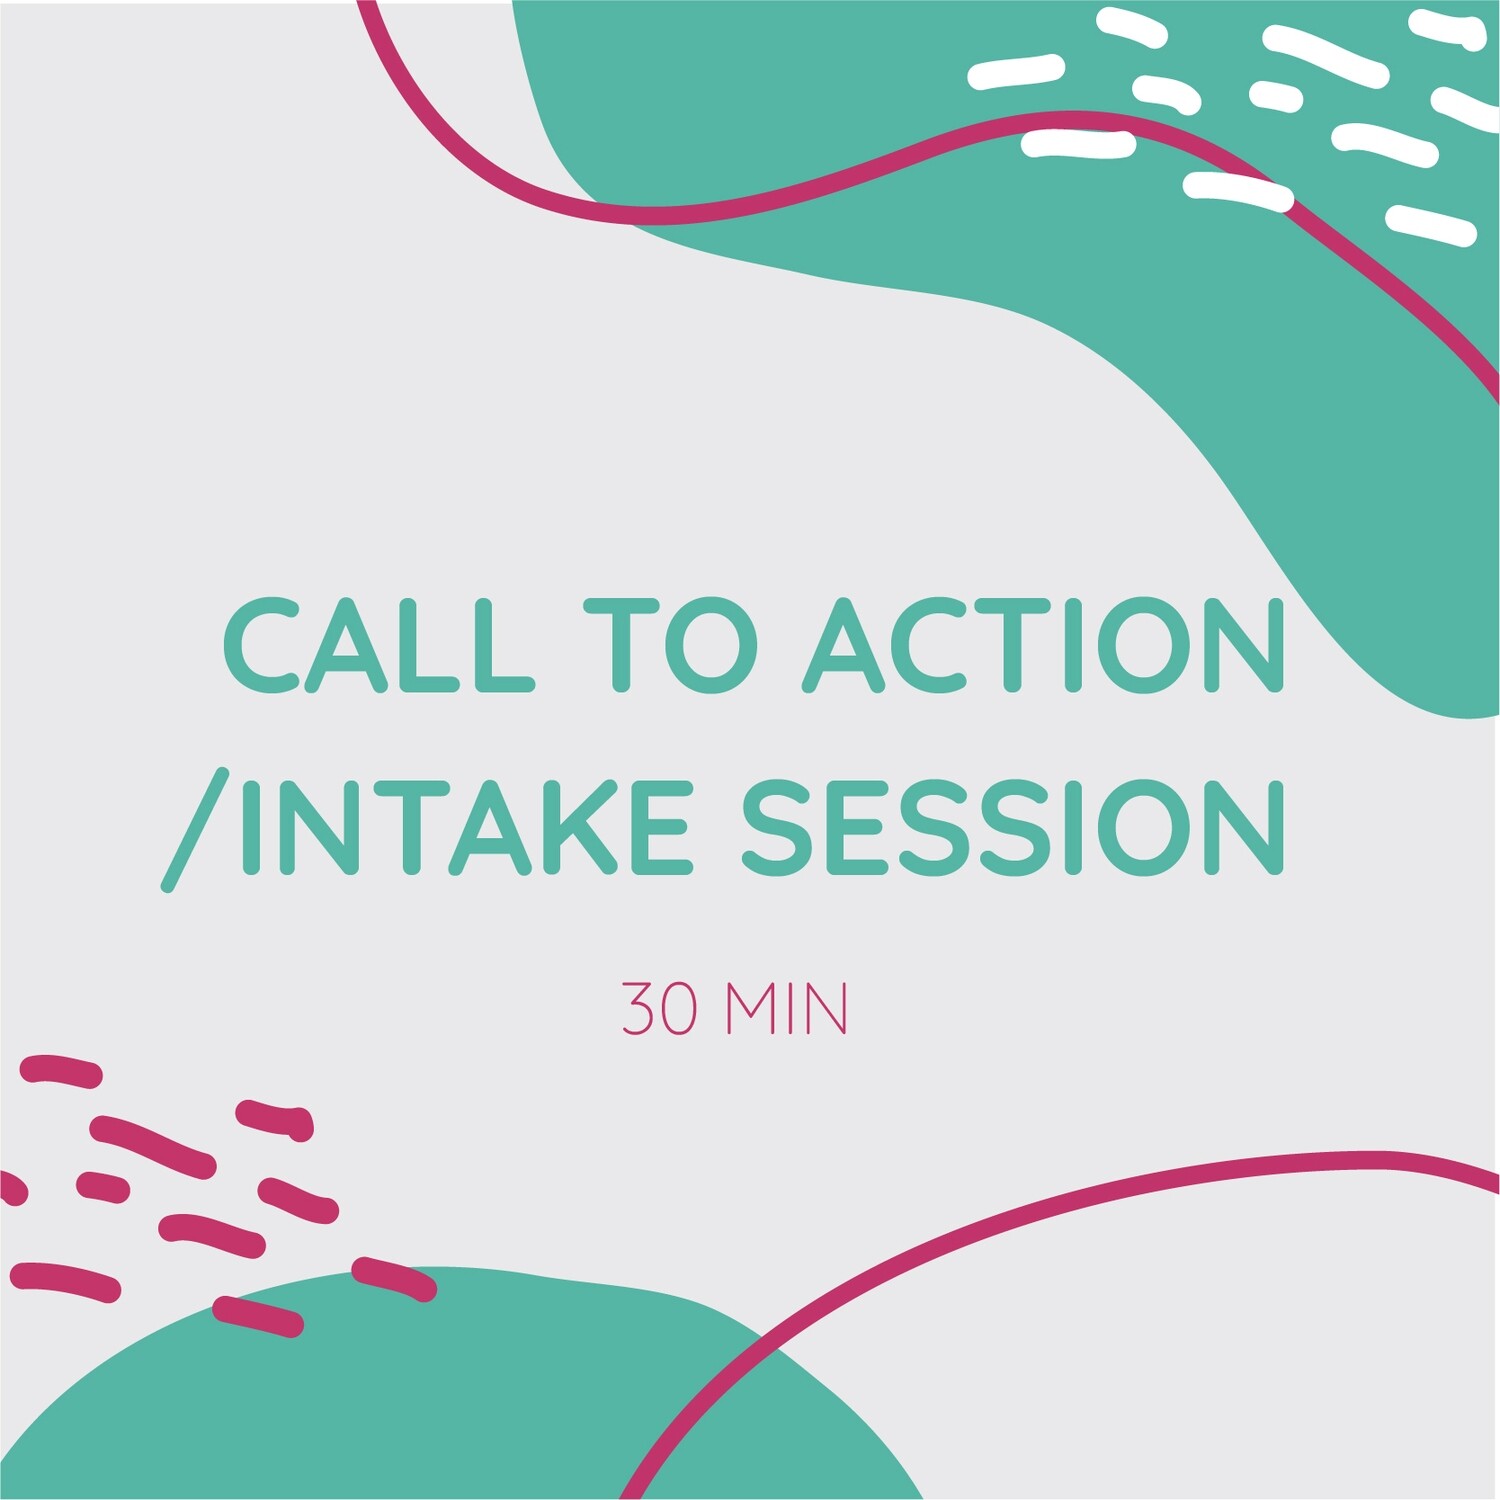 Call to action /intake session 30 min